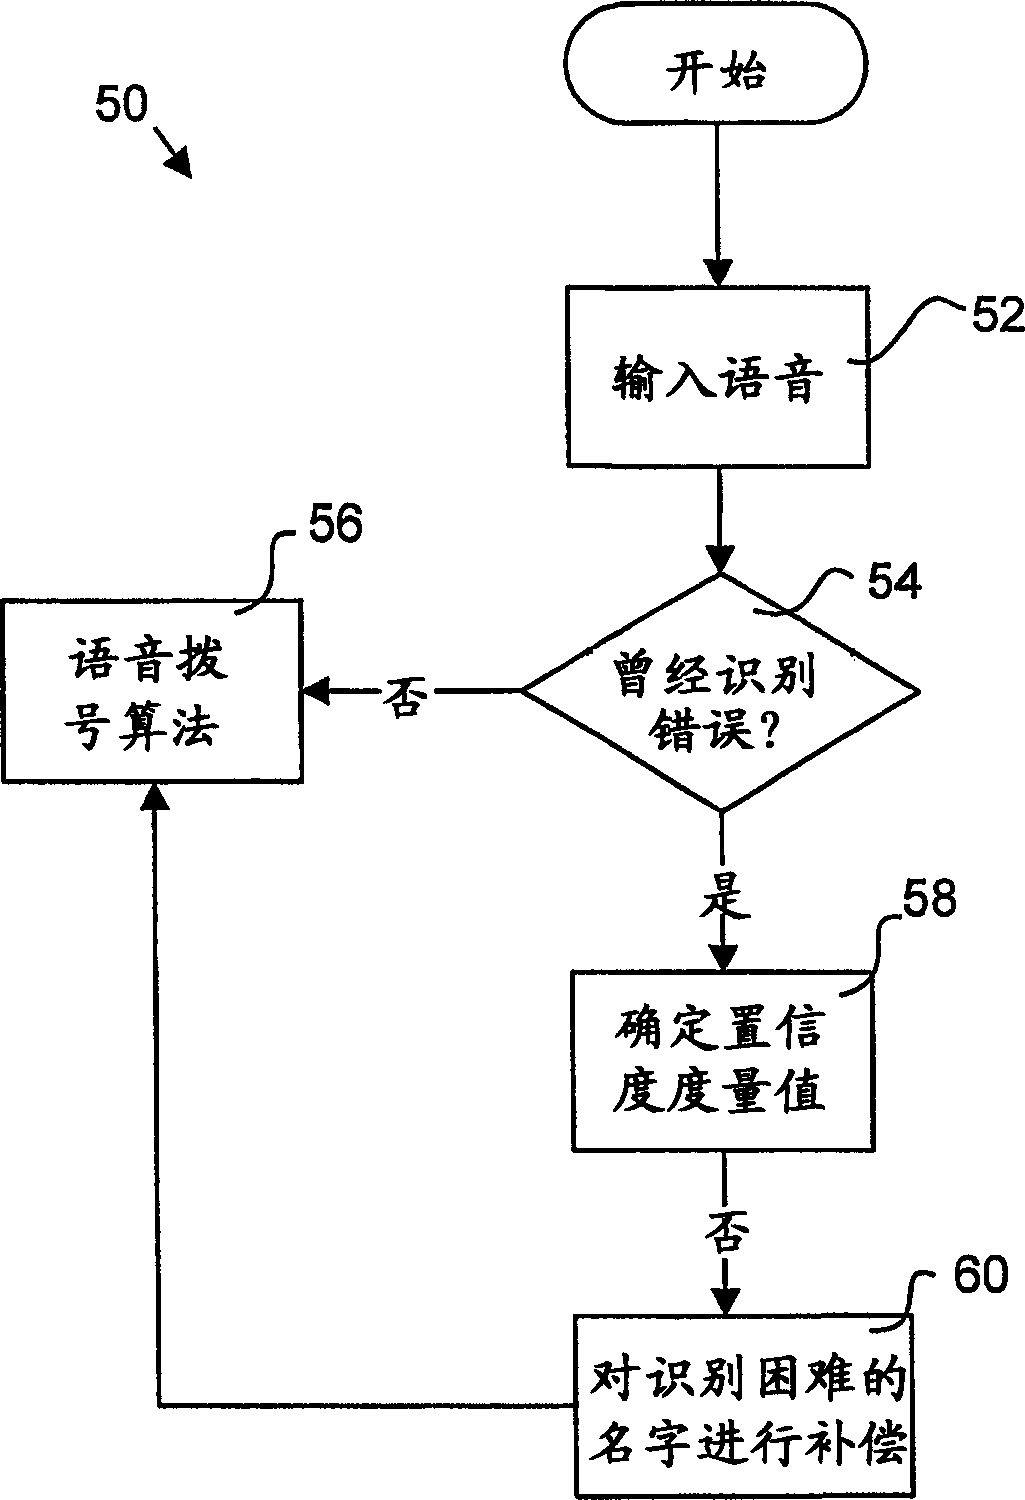 Method and apparatus for improved speech recognition with supplementary information